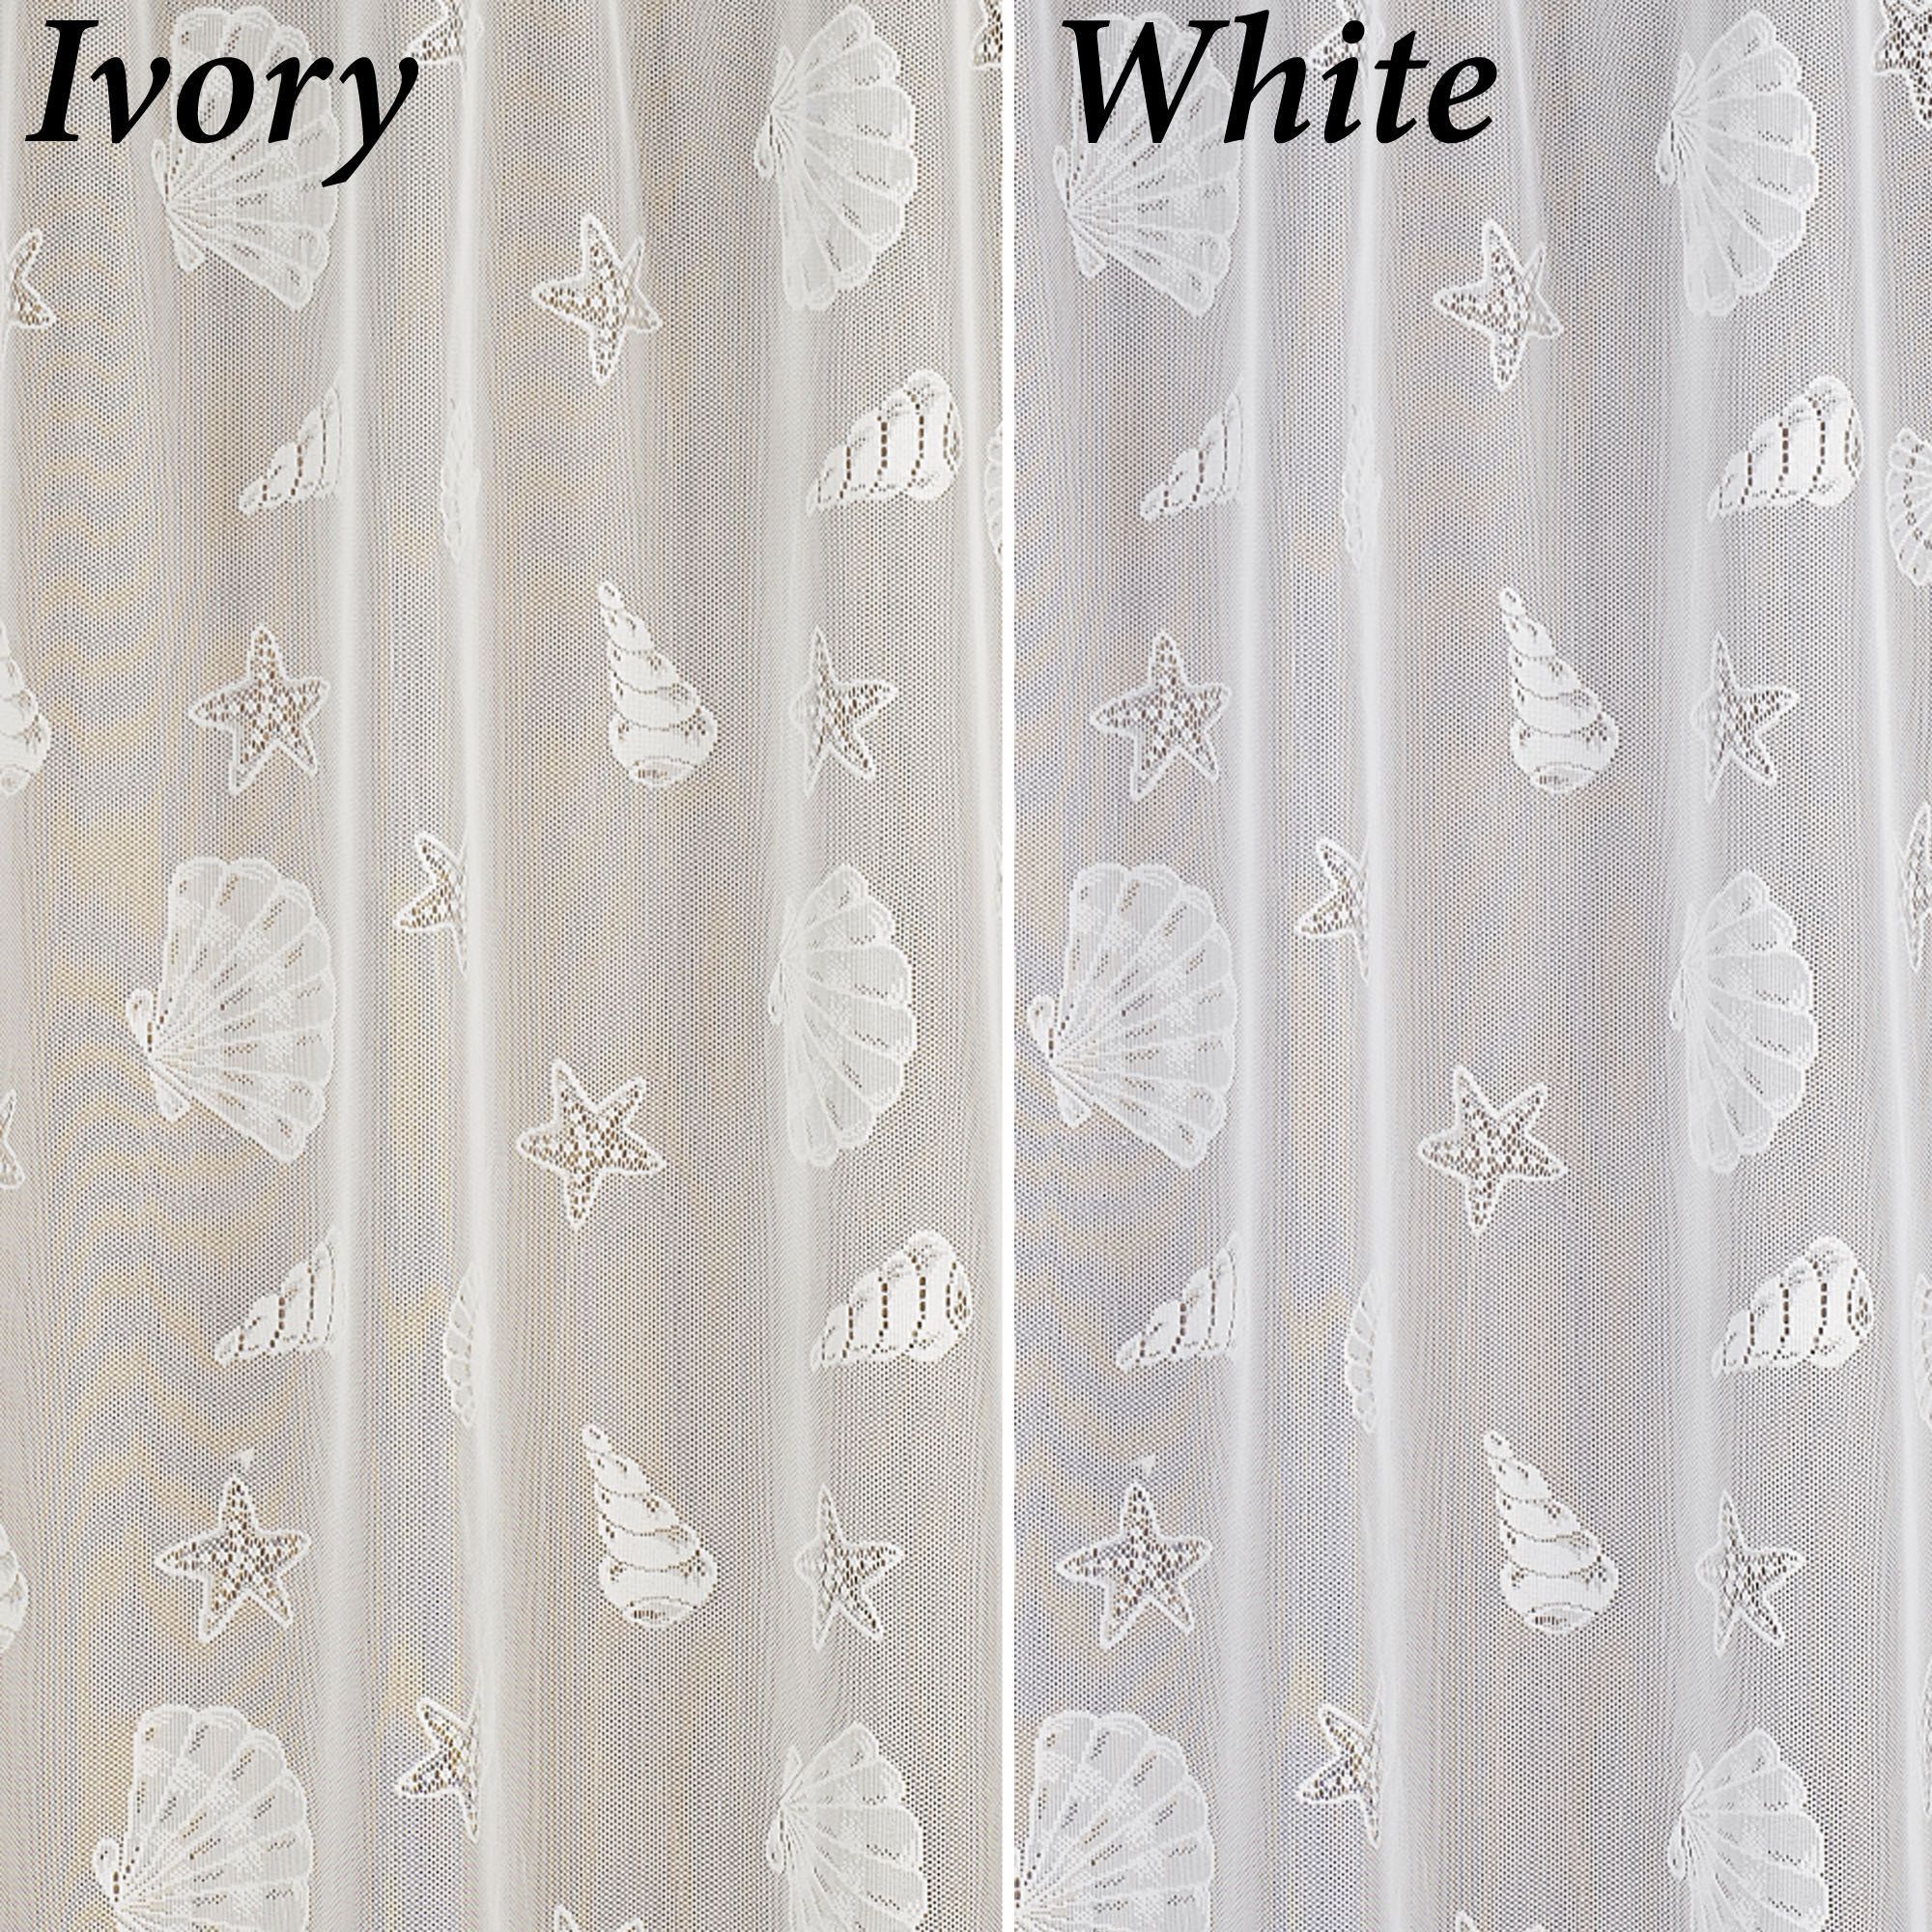 Seashells Lace Shower Curtain | Lace Shower Curtains, Vinyl With Marine Life Motif Knitted Lace Window Curtain Pieces (View 12 of 20)